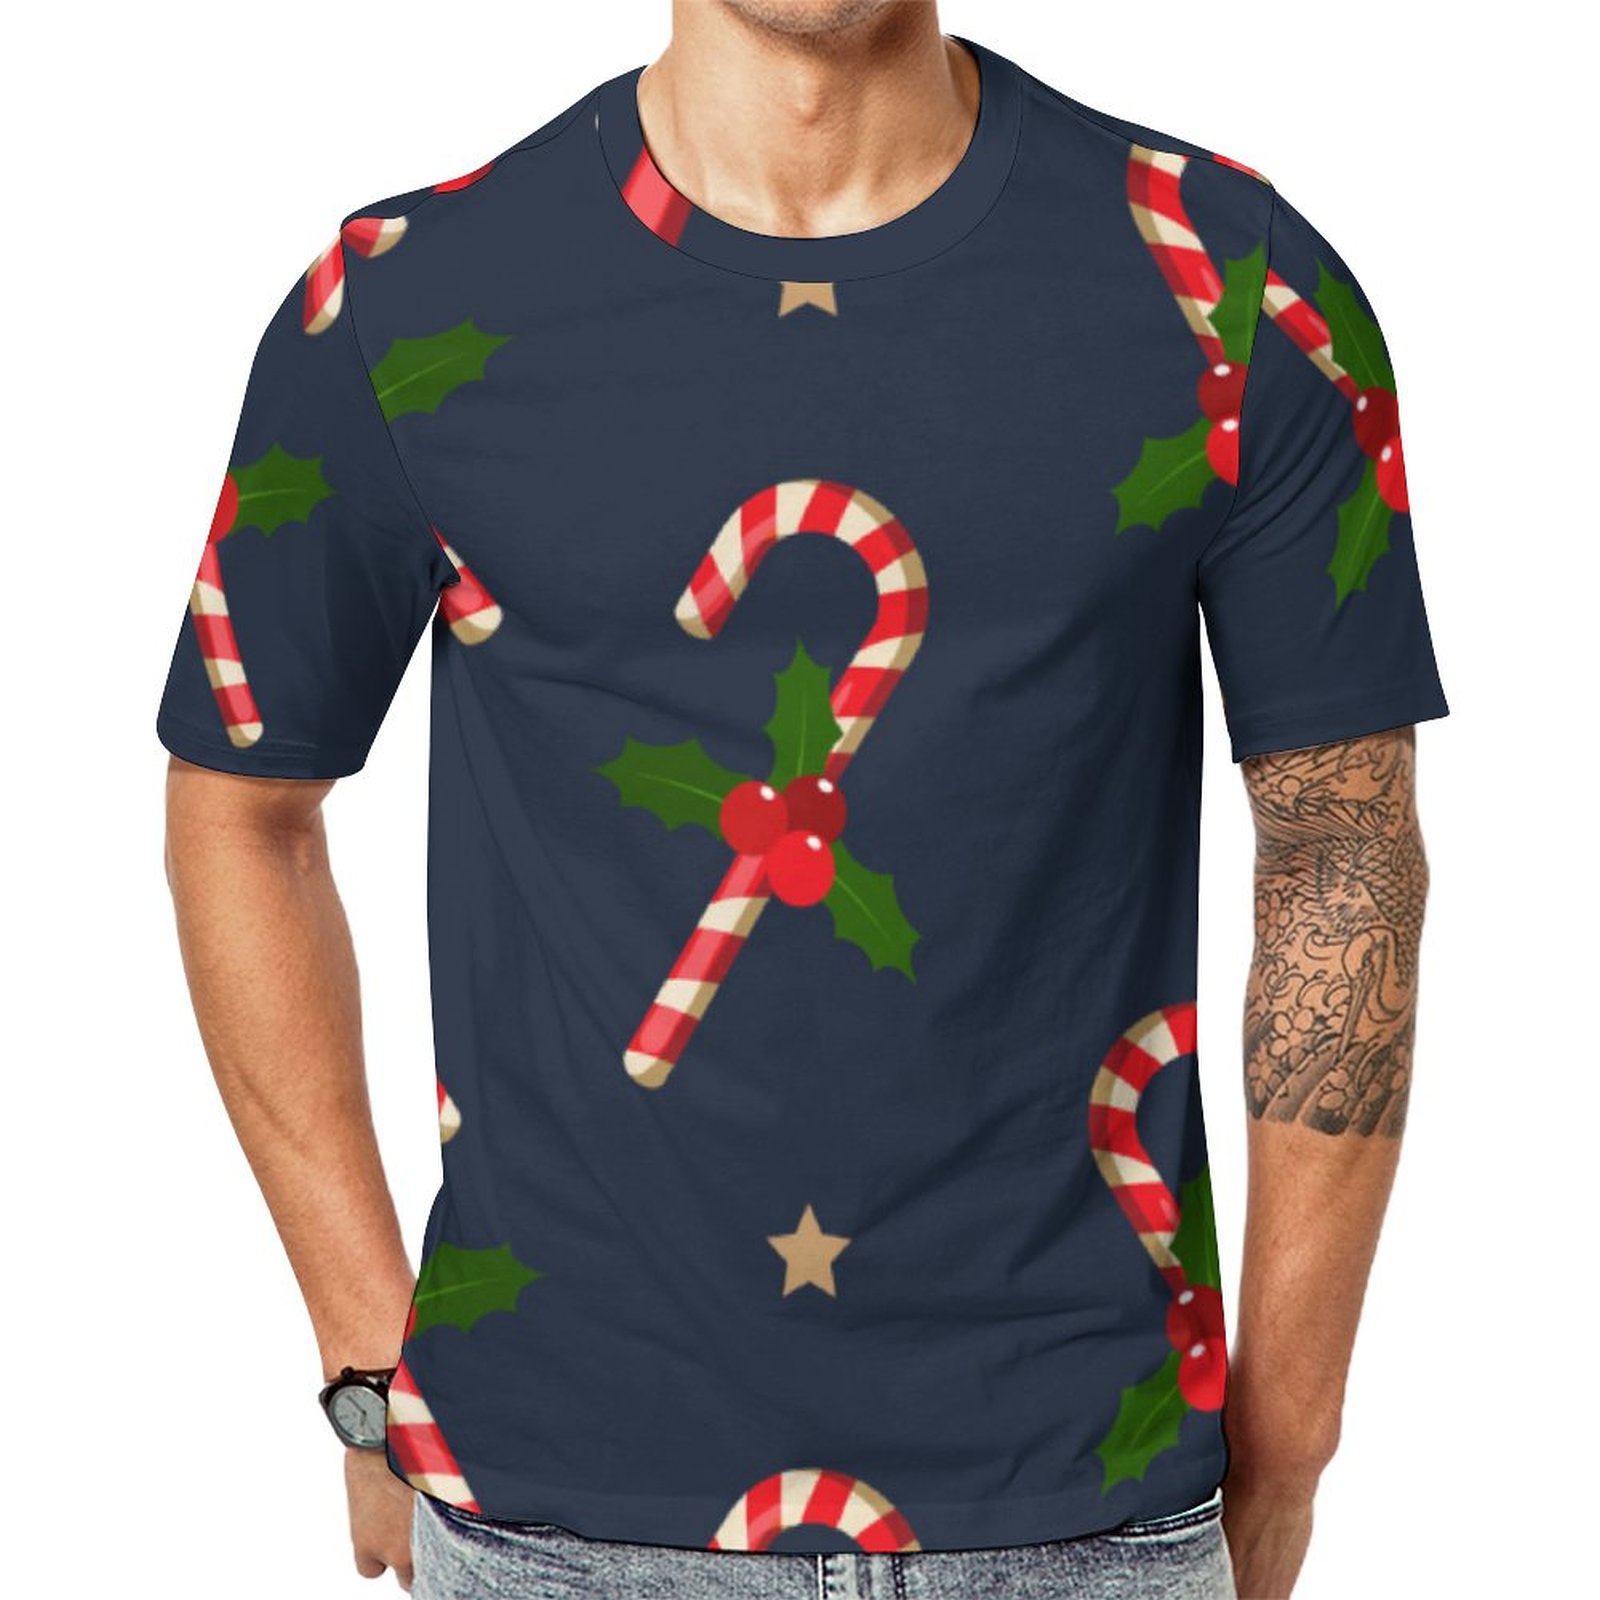 Christmas Holiday Red White Festive Candy Canes Short Sleeve Print Unisex Tshirt Summer Casual Tees for Men and Women Coolcoshirts